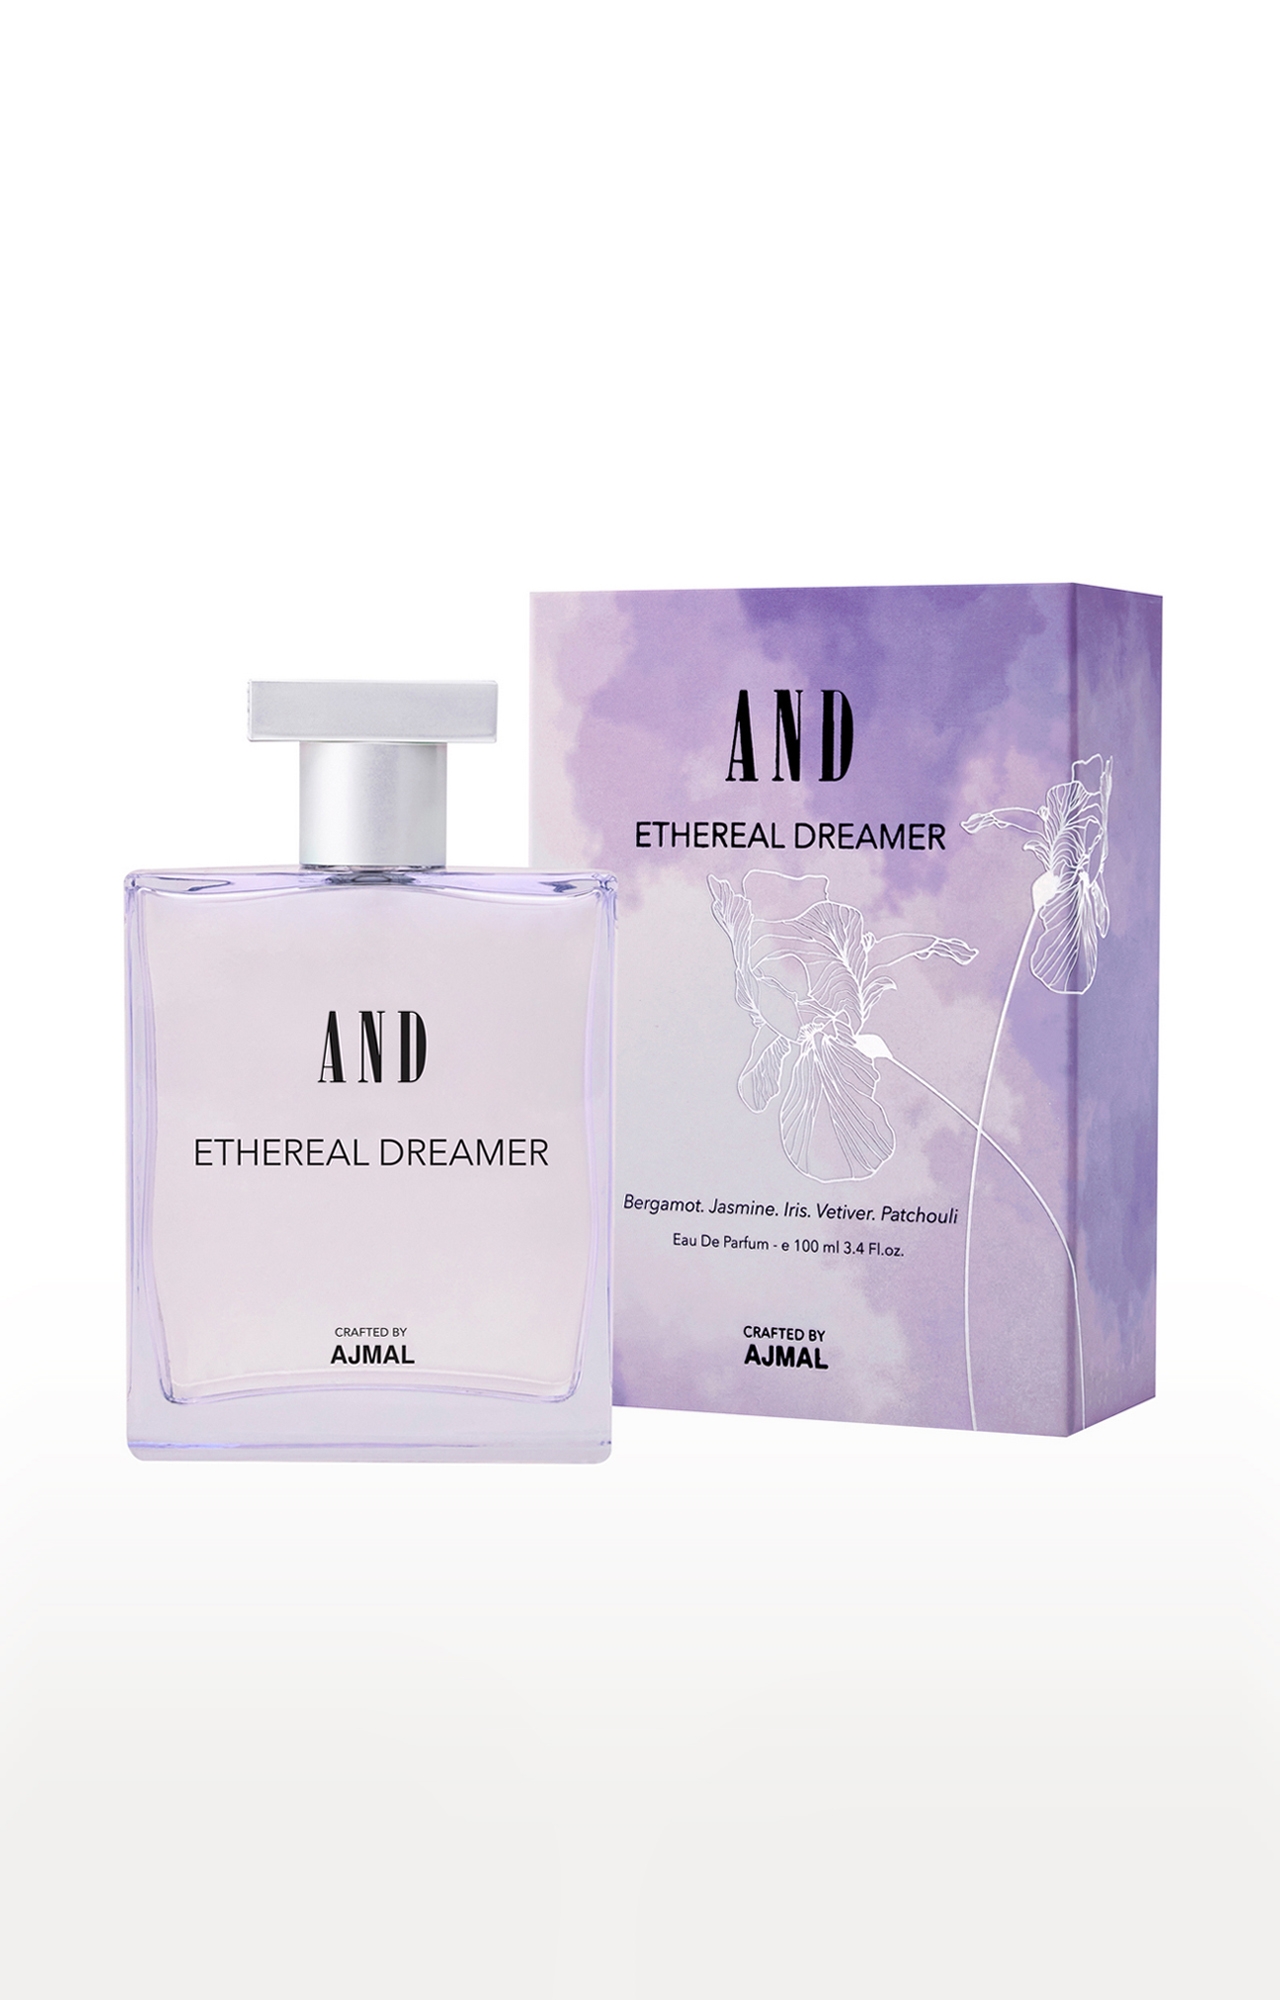 And Ethereal Dreamer Eau De Parfum 100ML Long Lasting Scent Spray Gift For Women Crafted By Ajmal